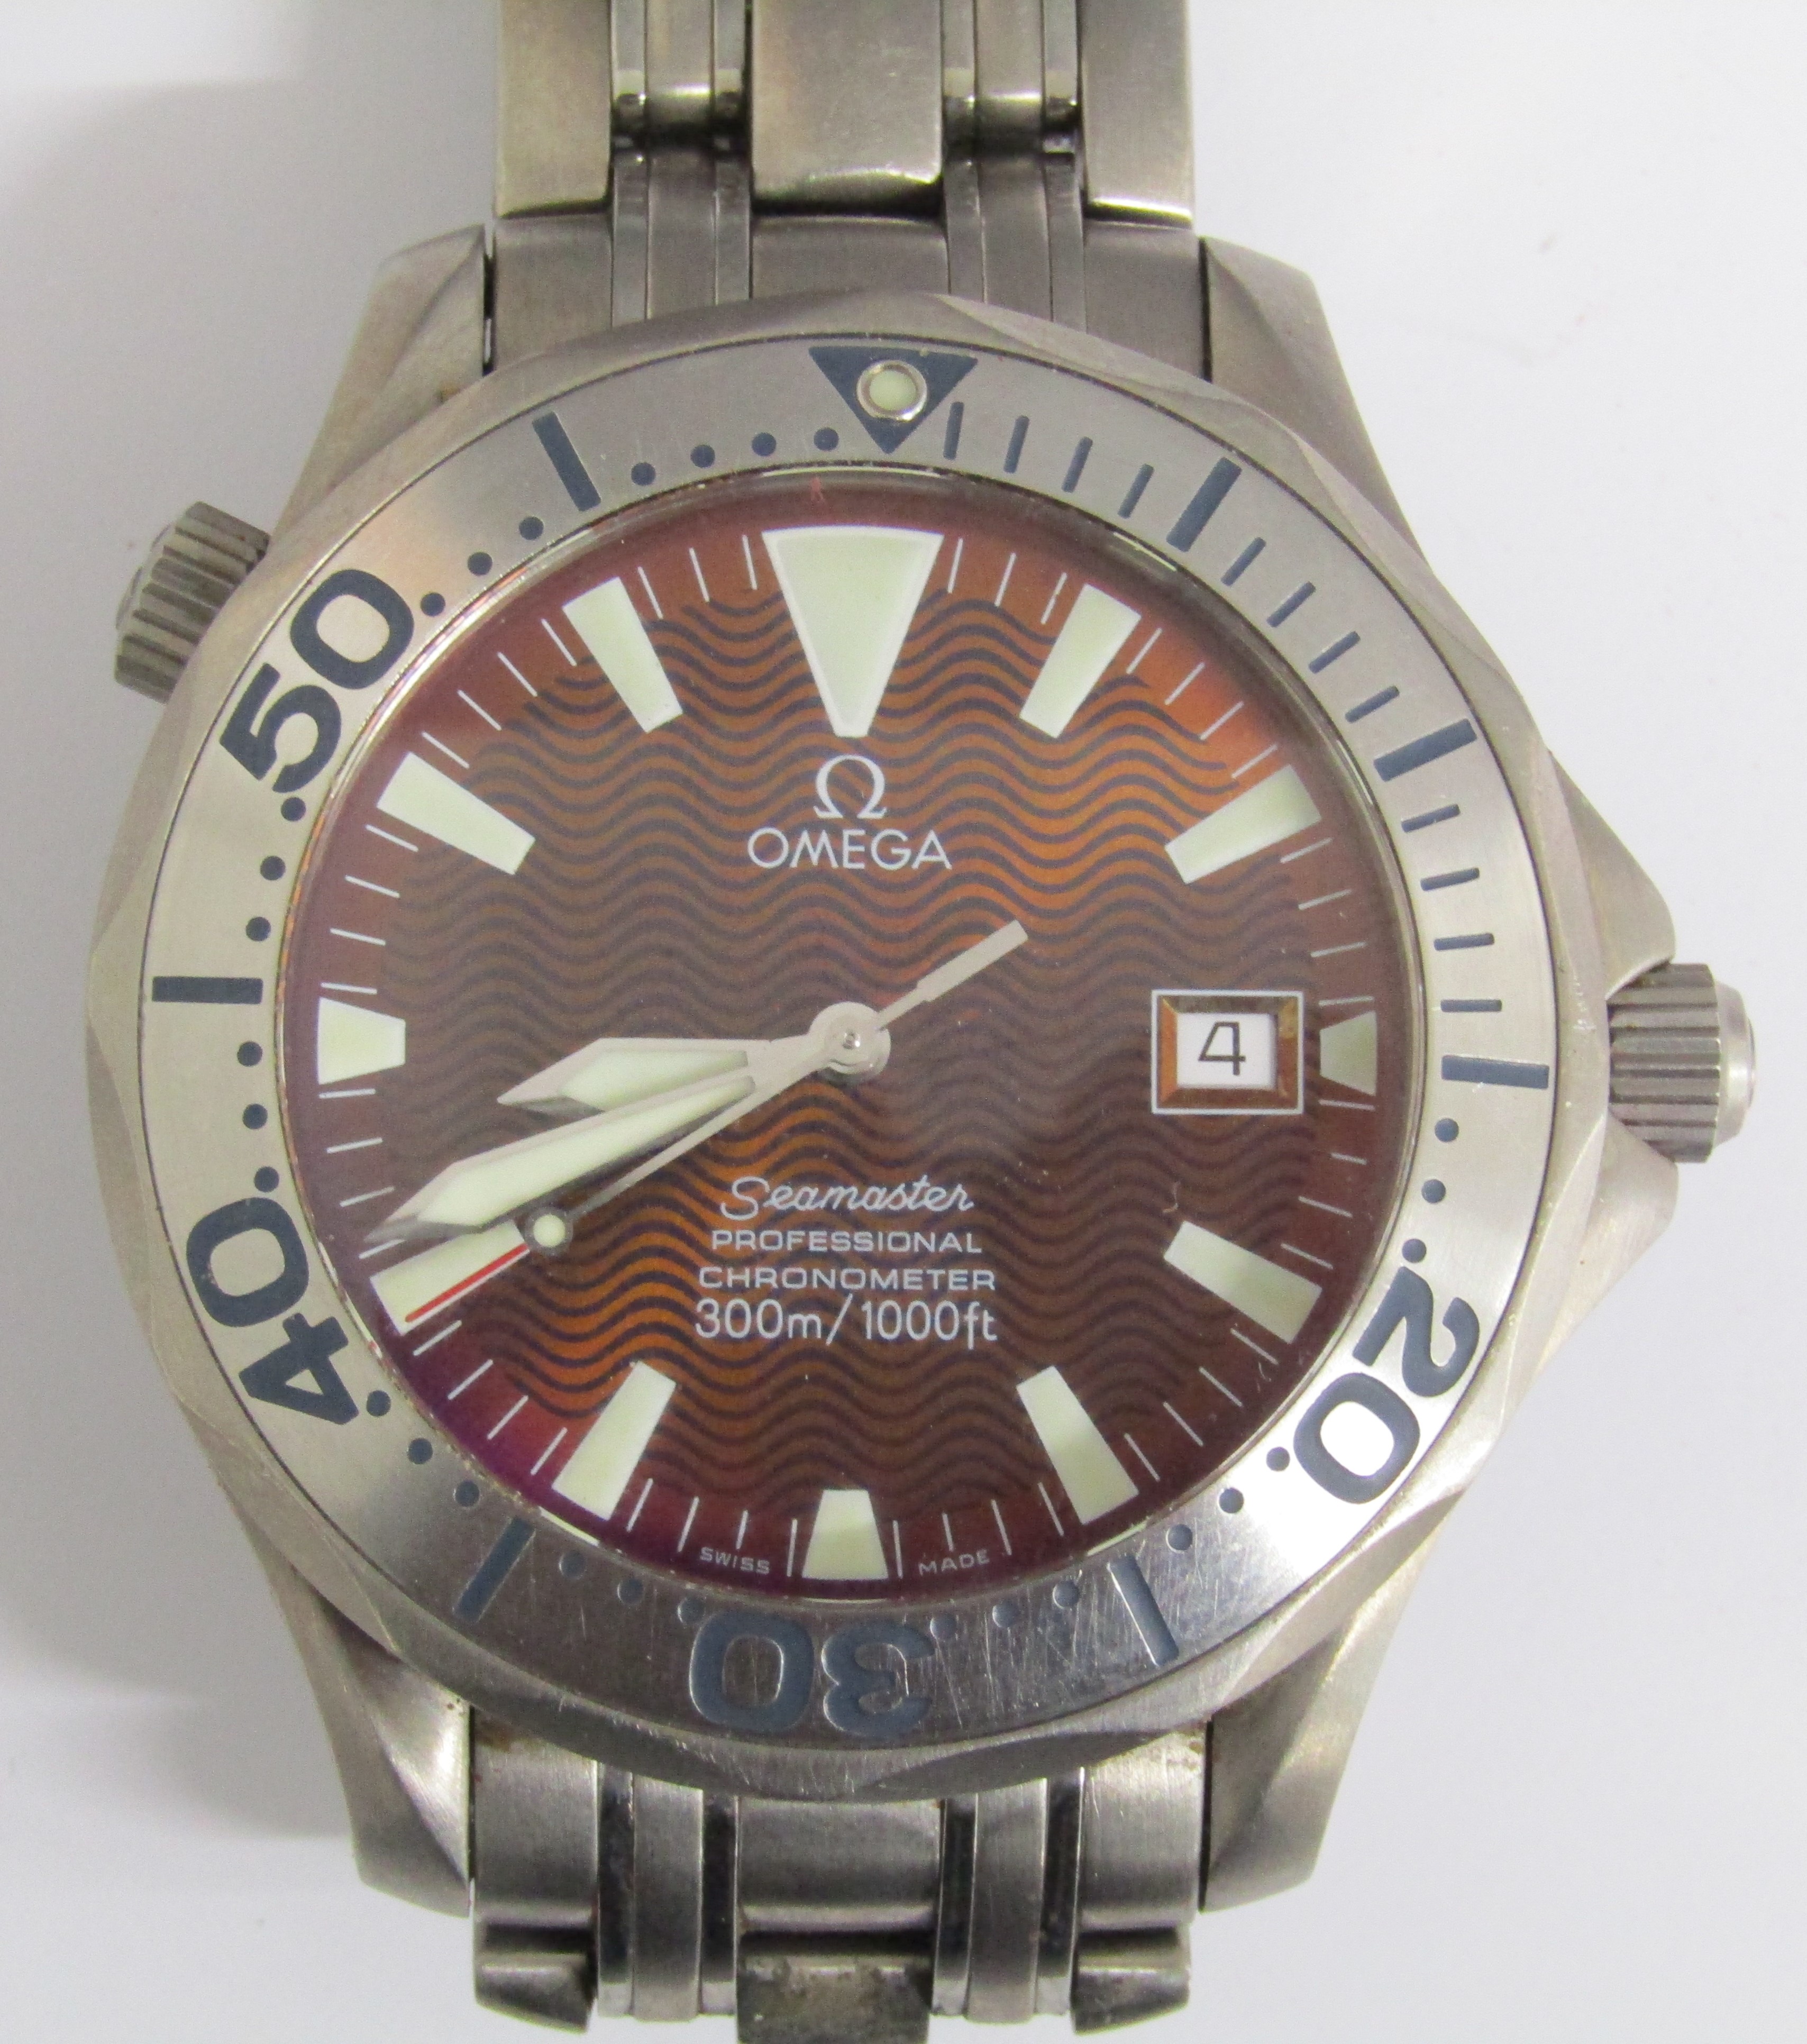 Omega Seamaster TI-825 automatic gent's wristwatch with date aperture and associated paperwork - Image 2 of 11